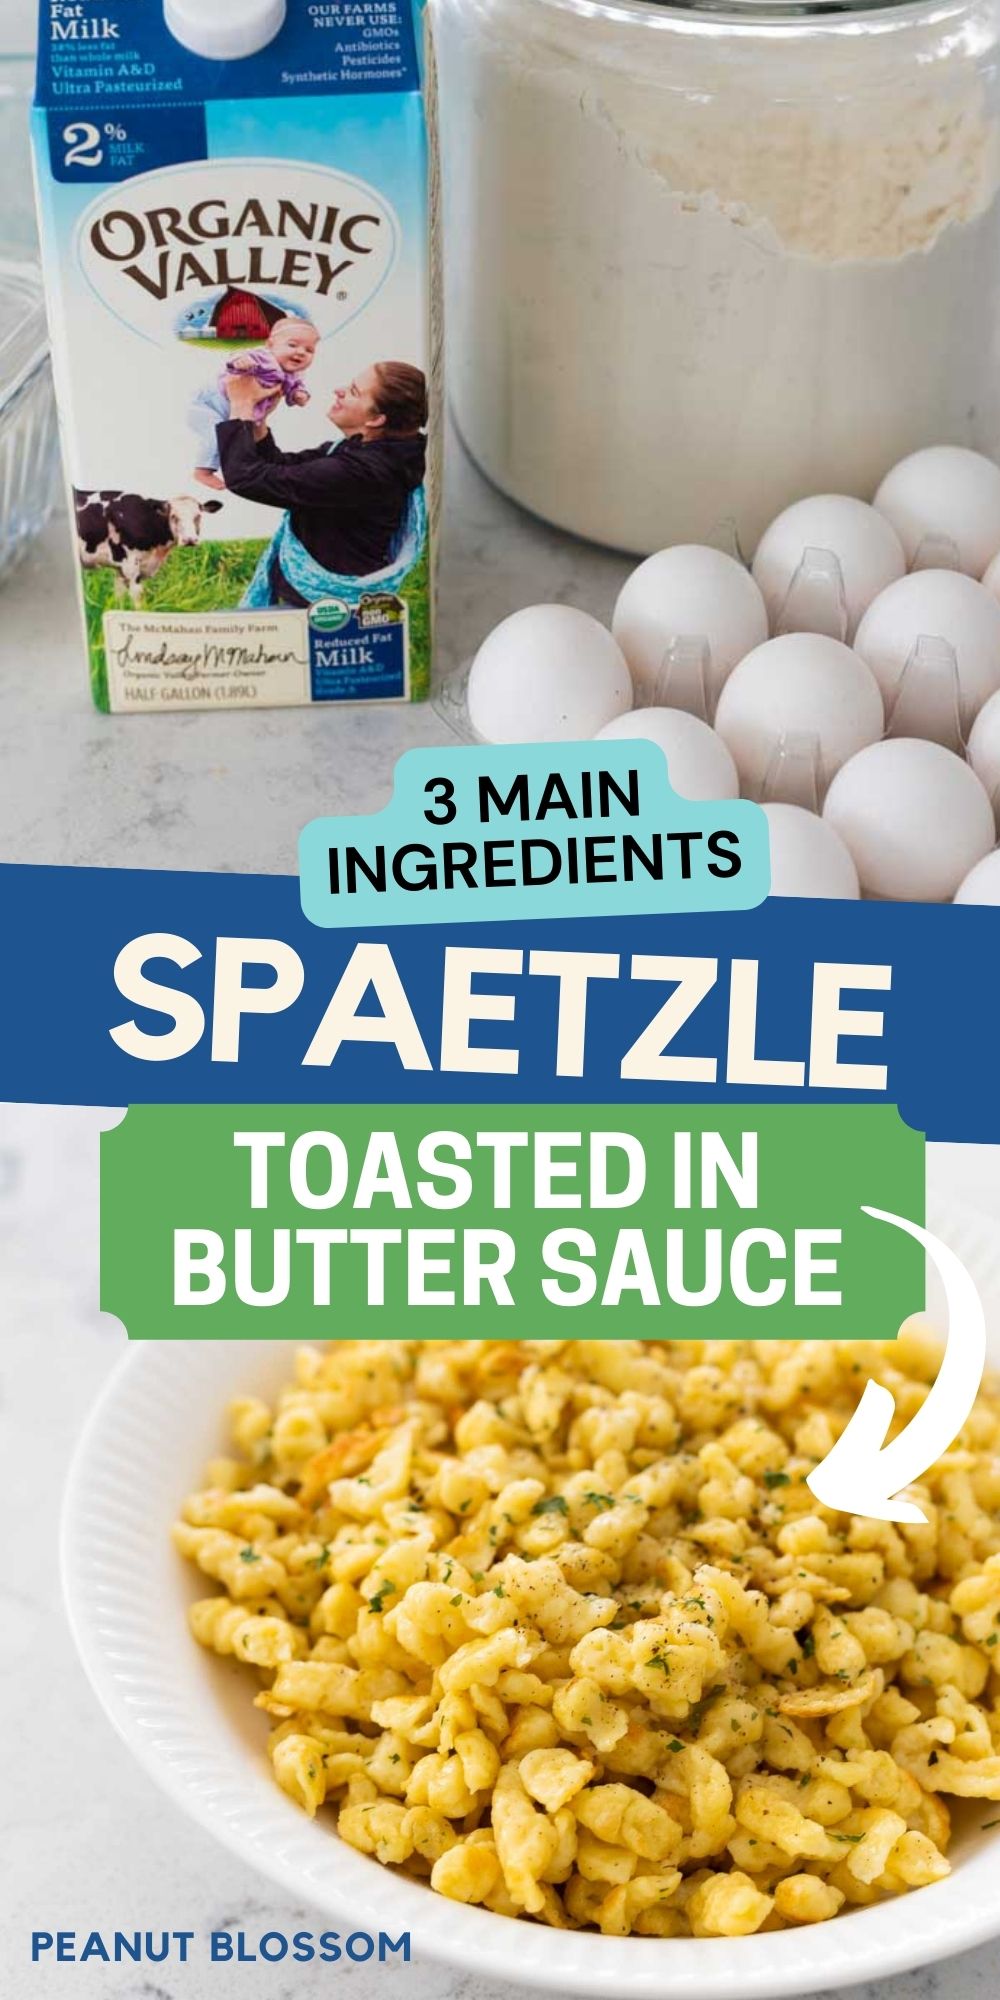 A photo collage shows the 3 main ingredients and the finished bowl of spaetzle.